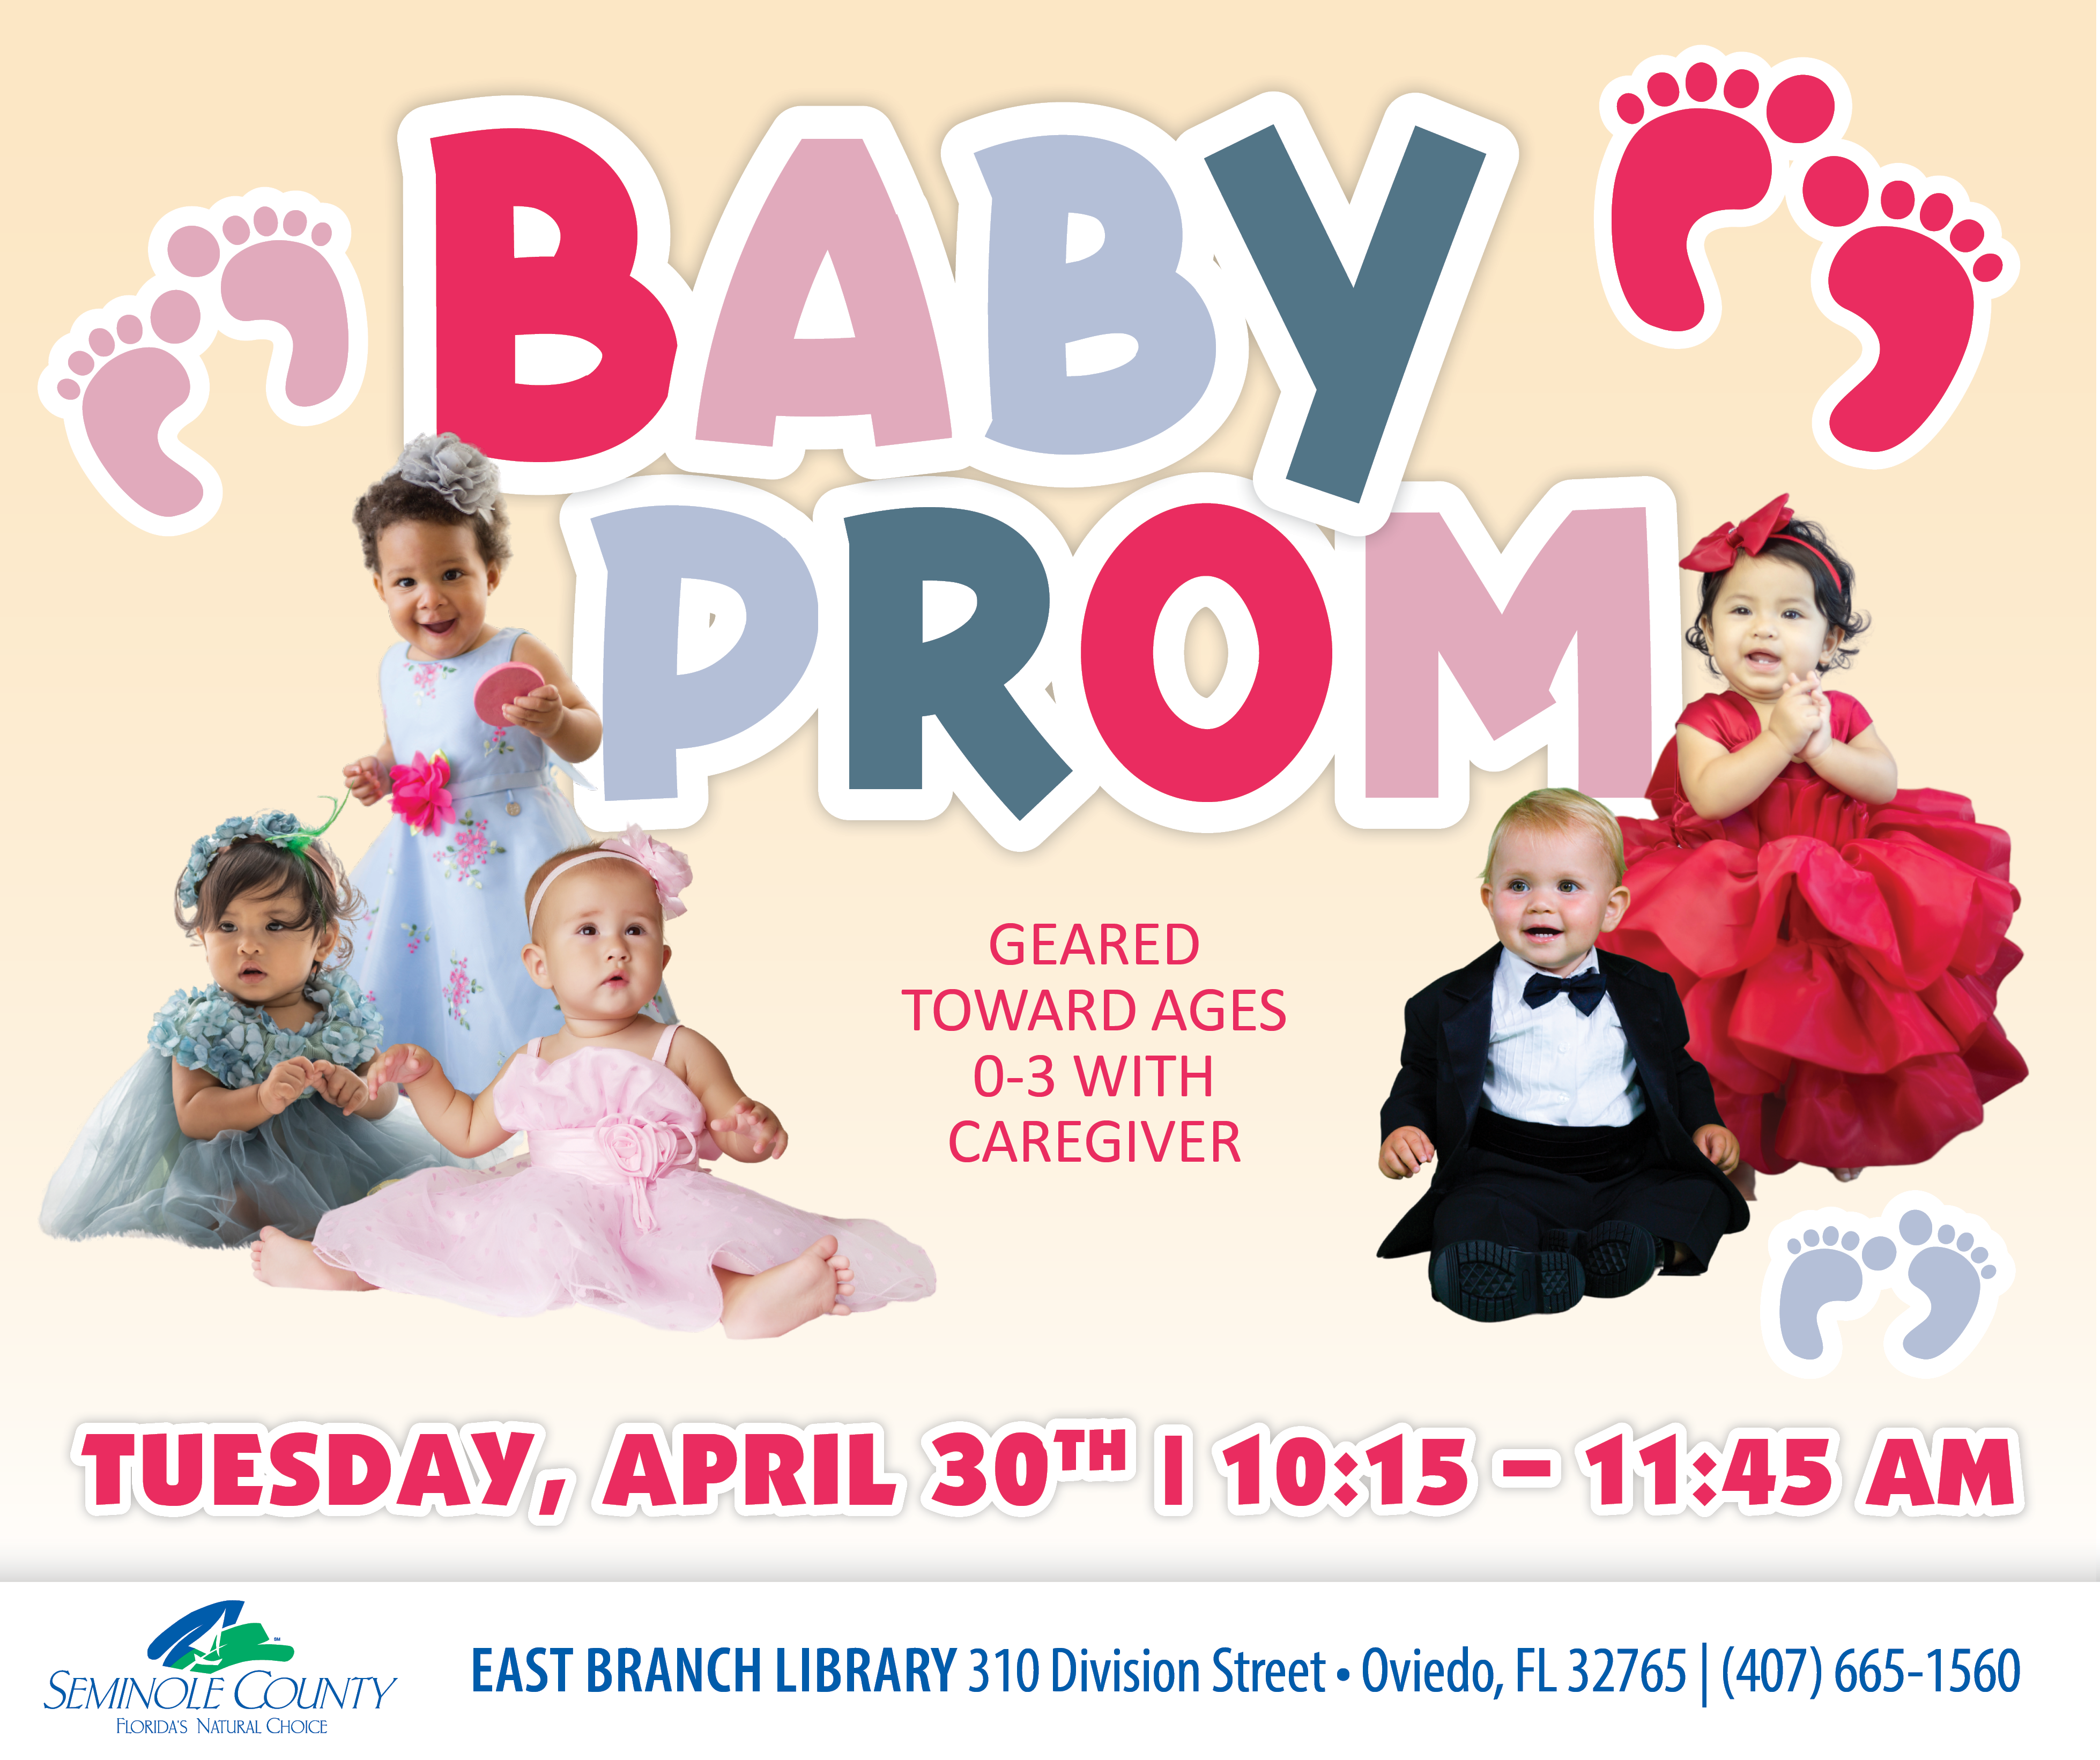 Baby Prom at the East Branch Library